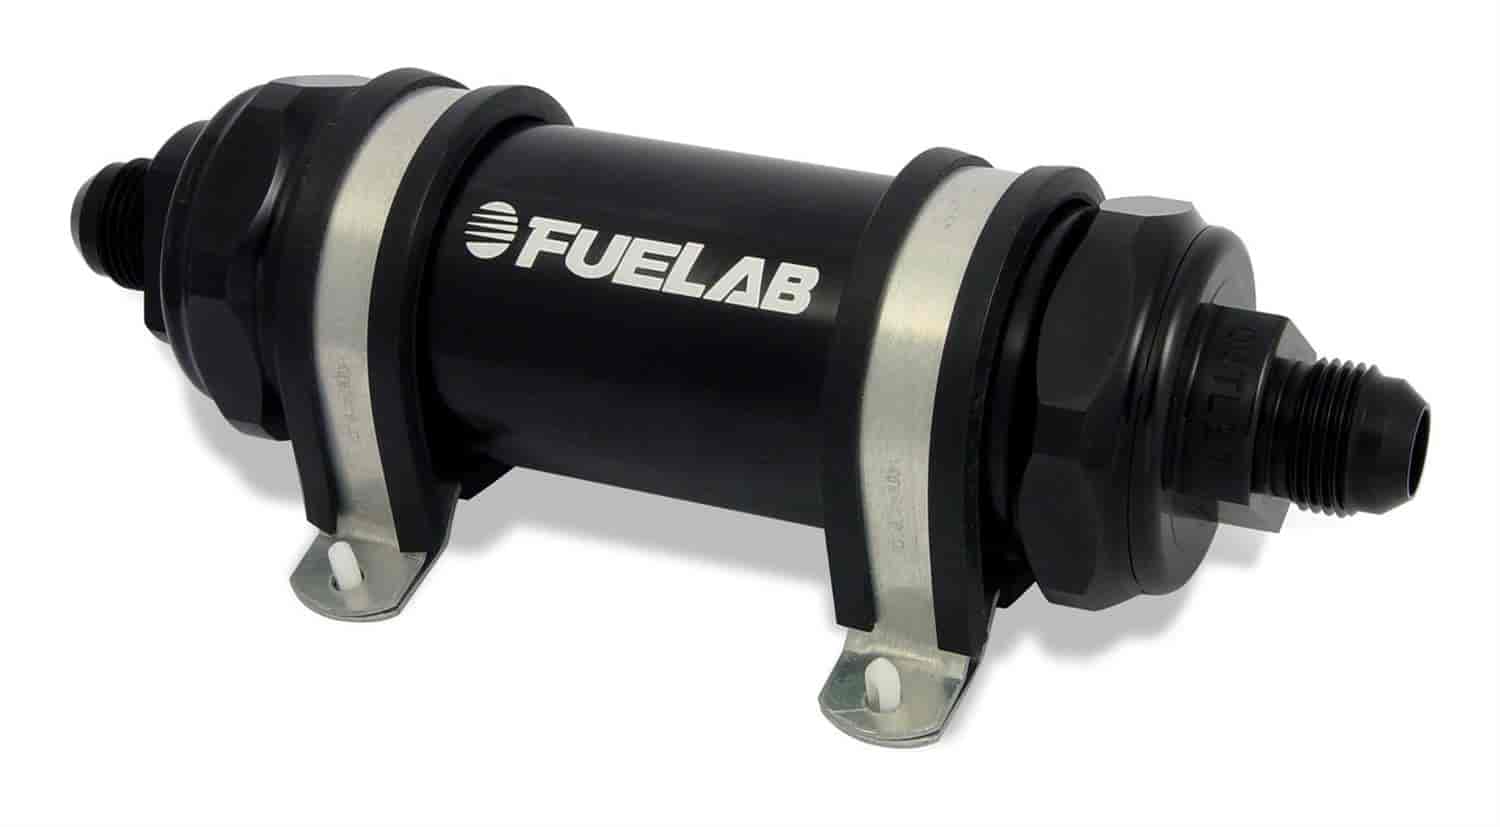 In-Line Fuel Filter Long Length -12AN Inlet/-6AN Outlet 75 micron stainless steel element